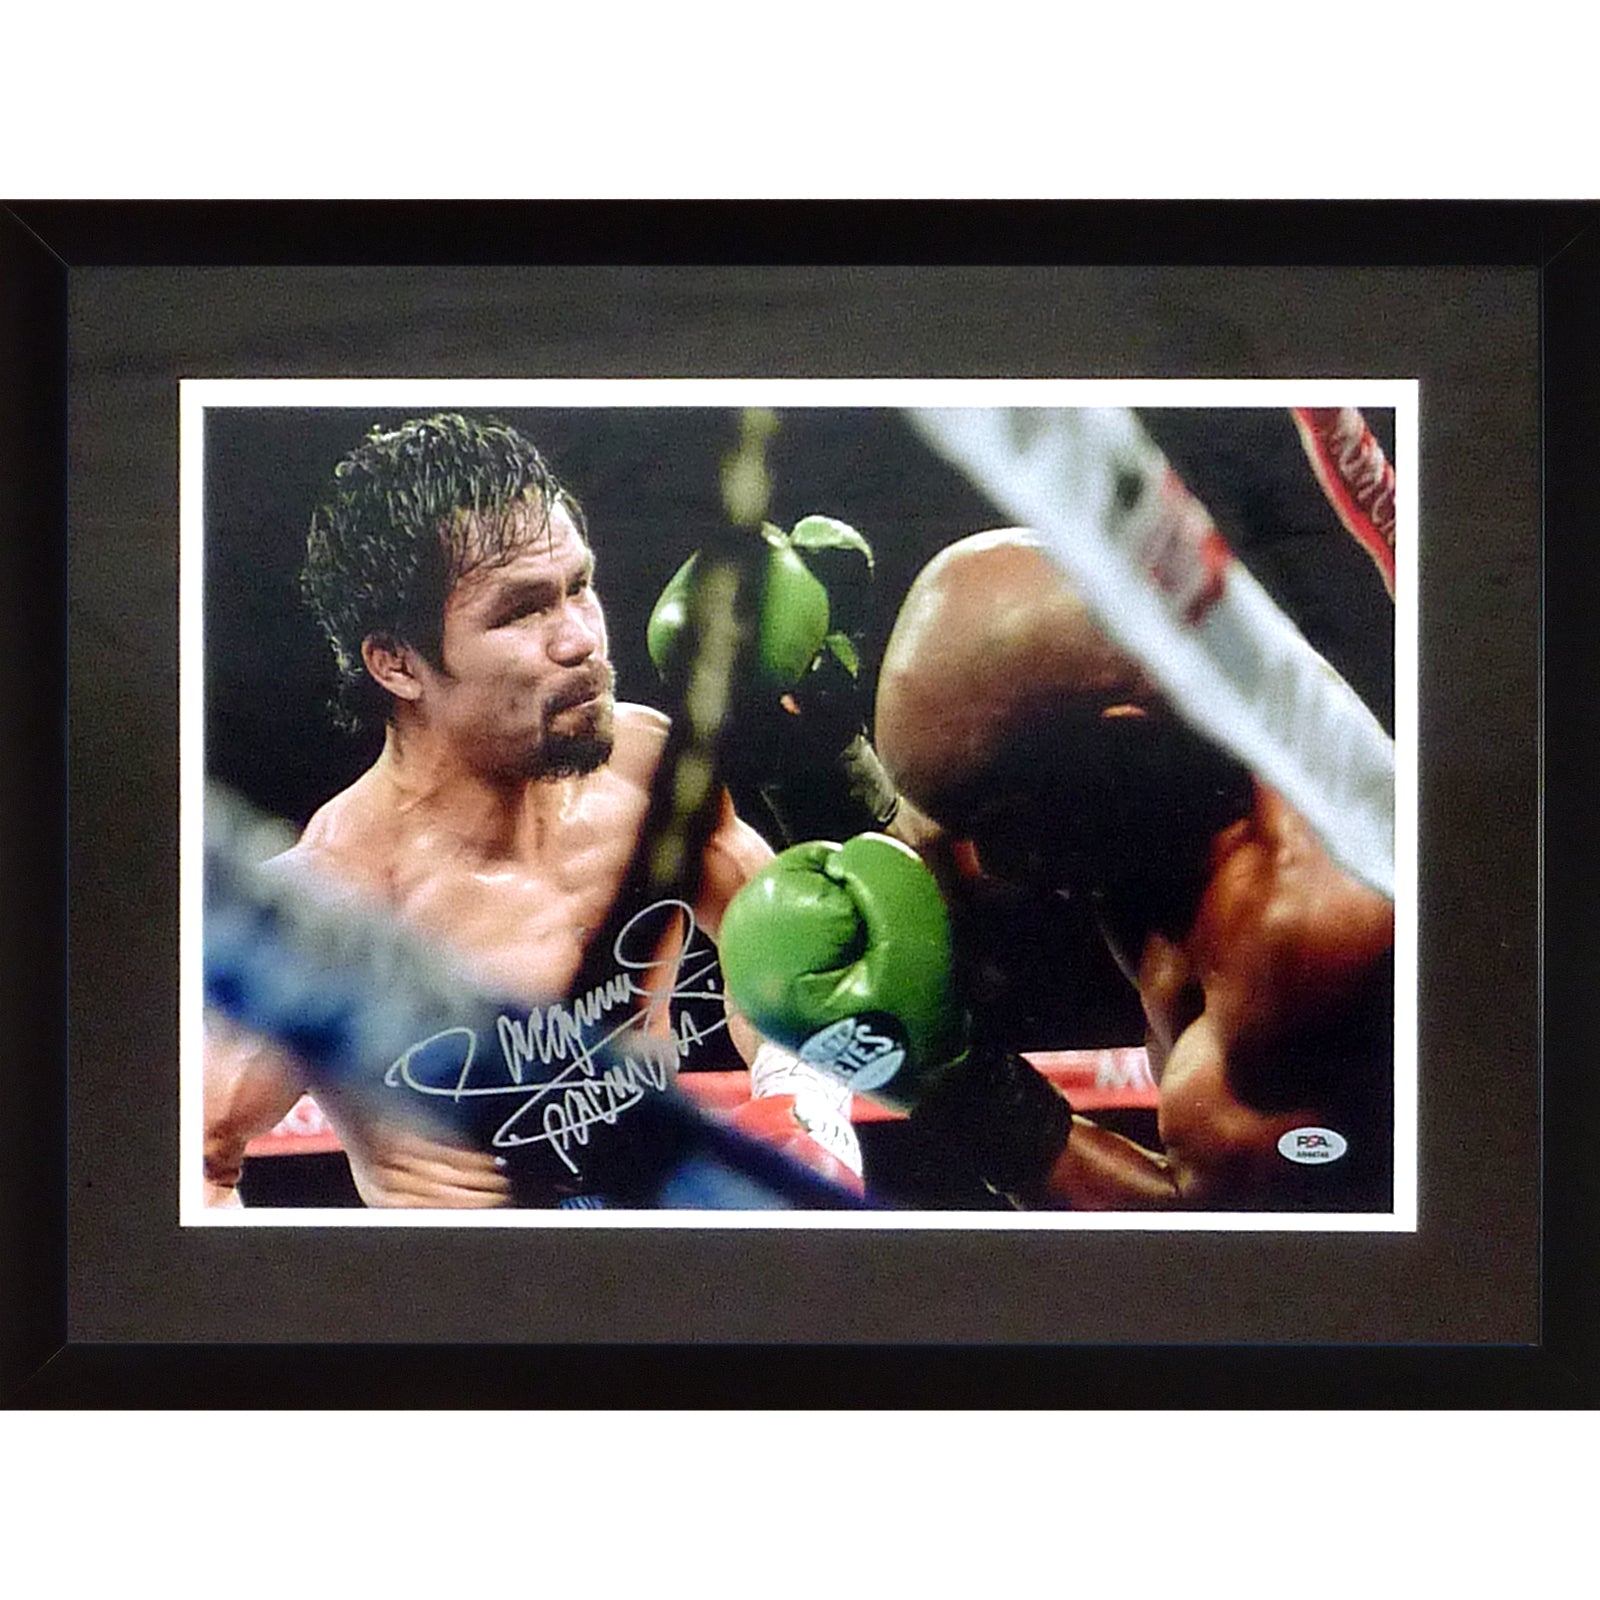 Manny Pacquiao Autographed Boxing (Horiz Action) Deluxe Framed 12x18 Photo - PSADNA